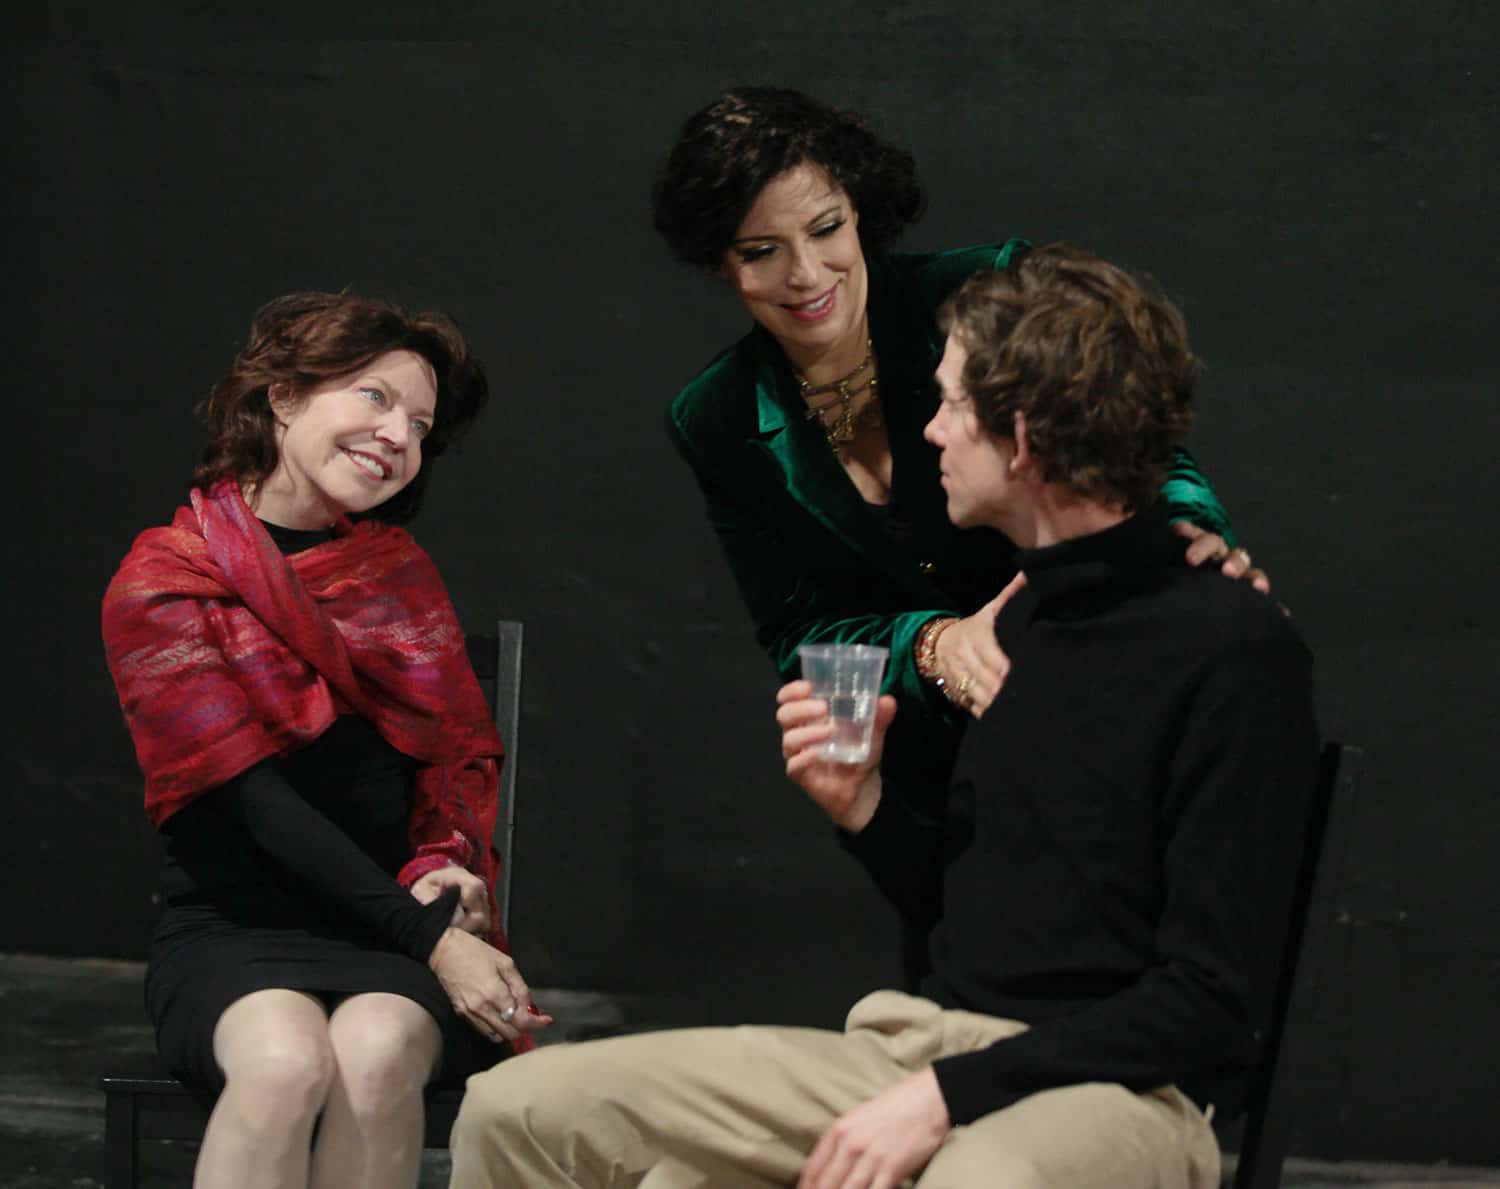 Seated woman in red shawl smiles at woman in green velvet blazer, whose hands rest on man in black turtleneck's shoulders